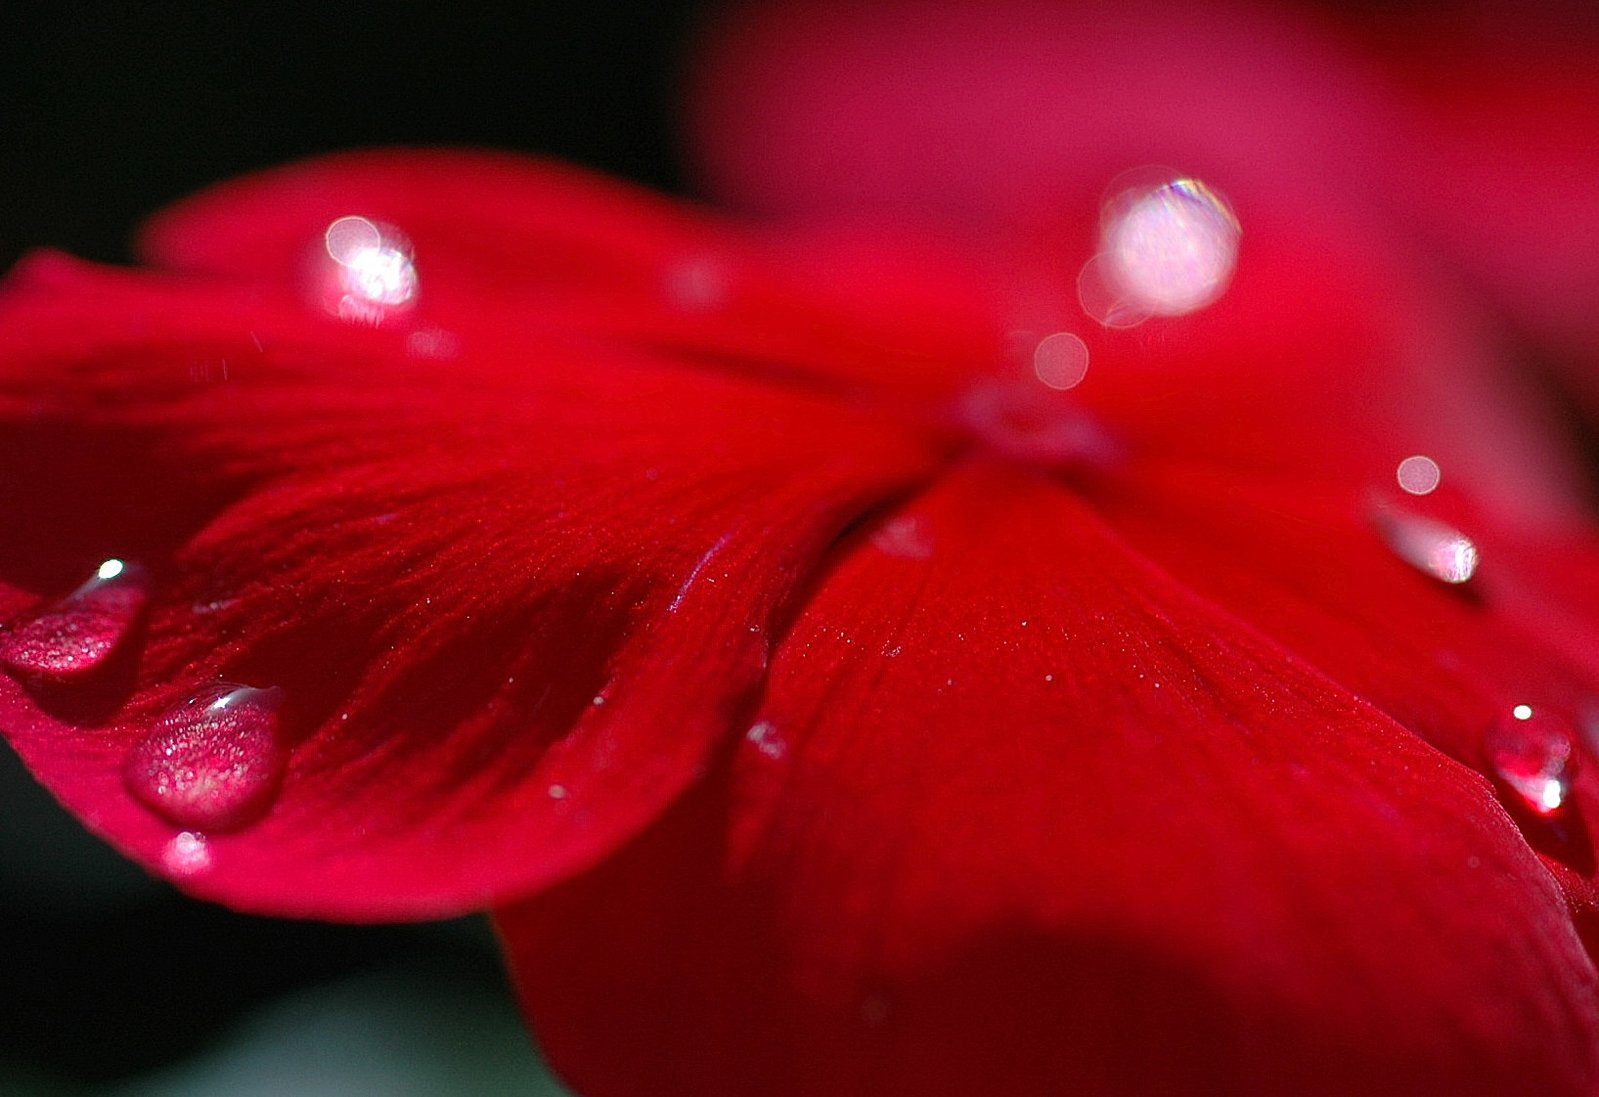 some water droplets on top of a red flower